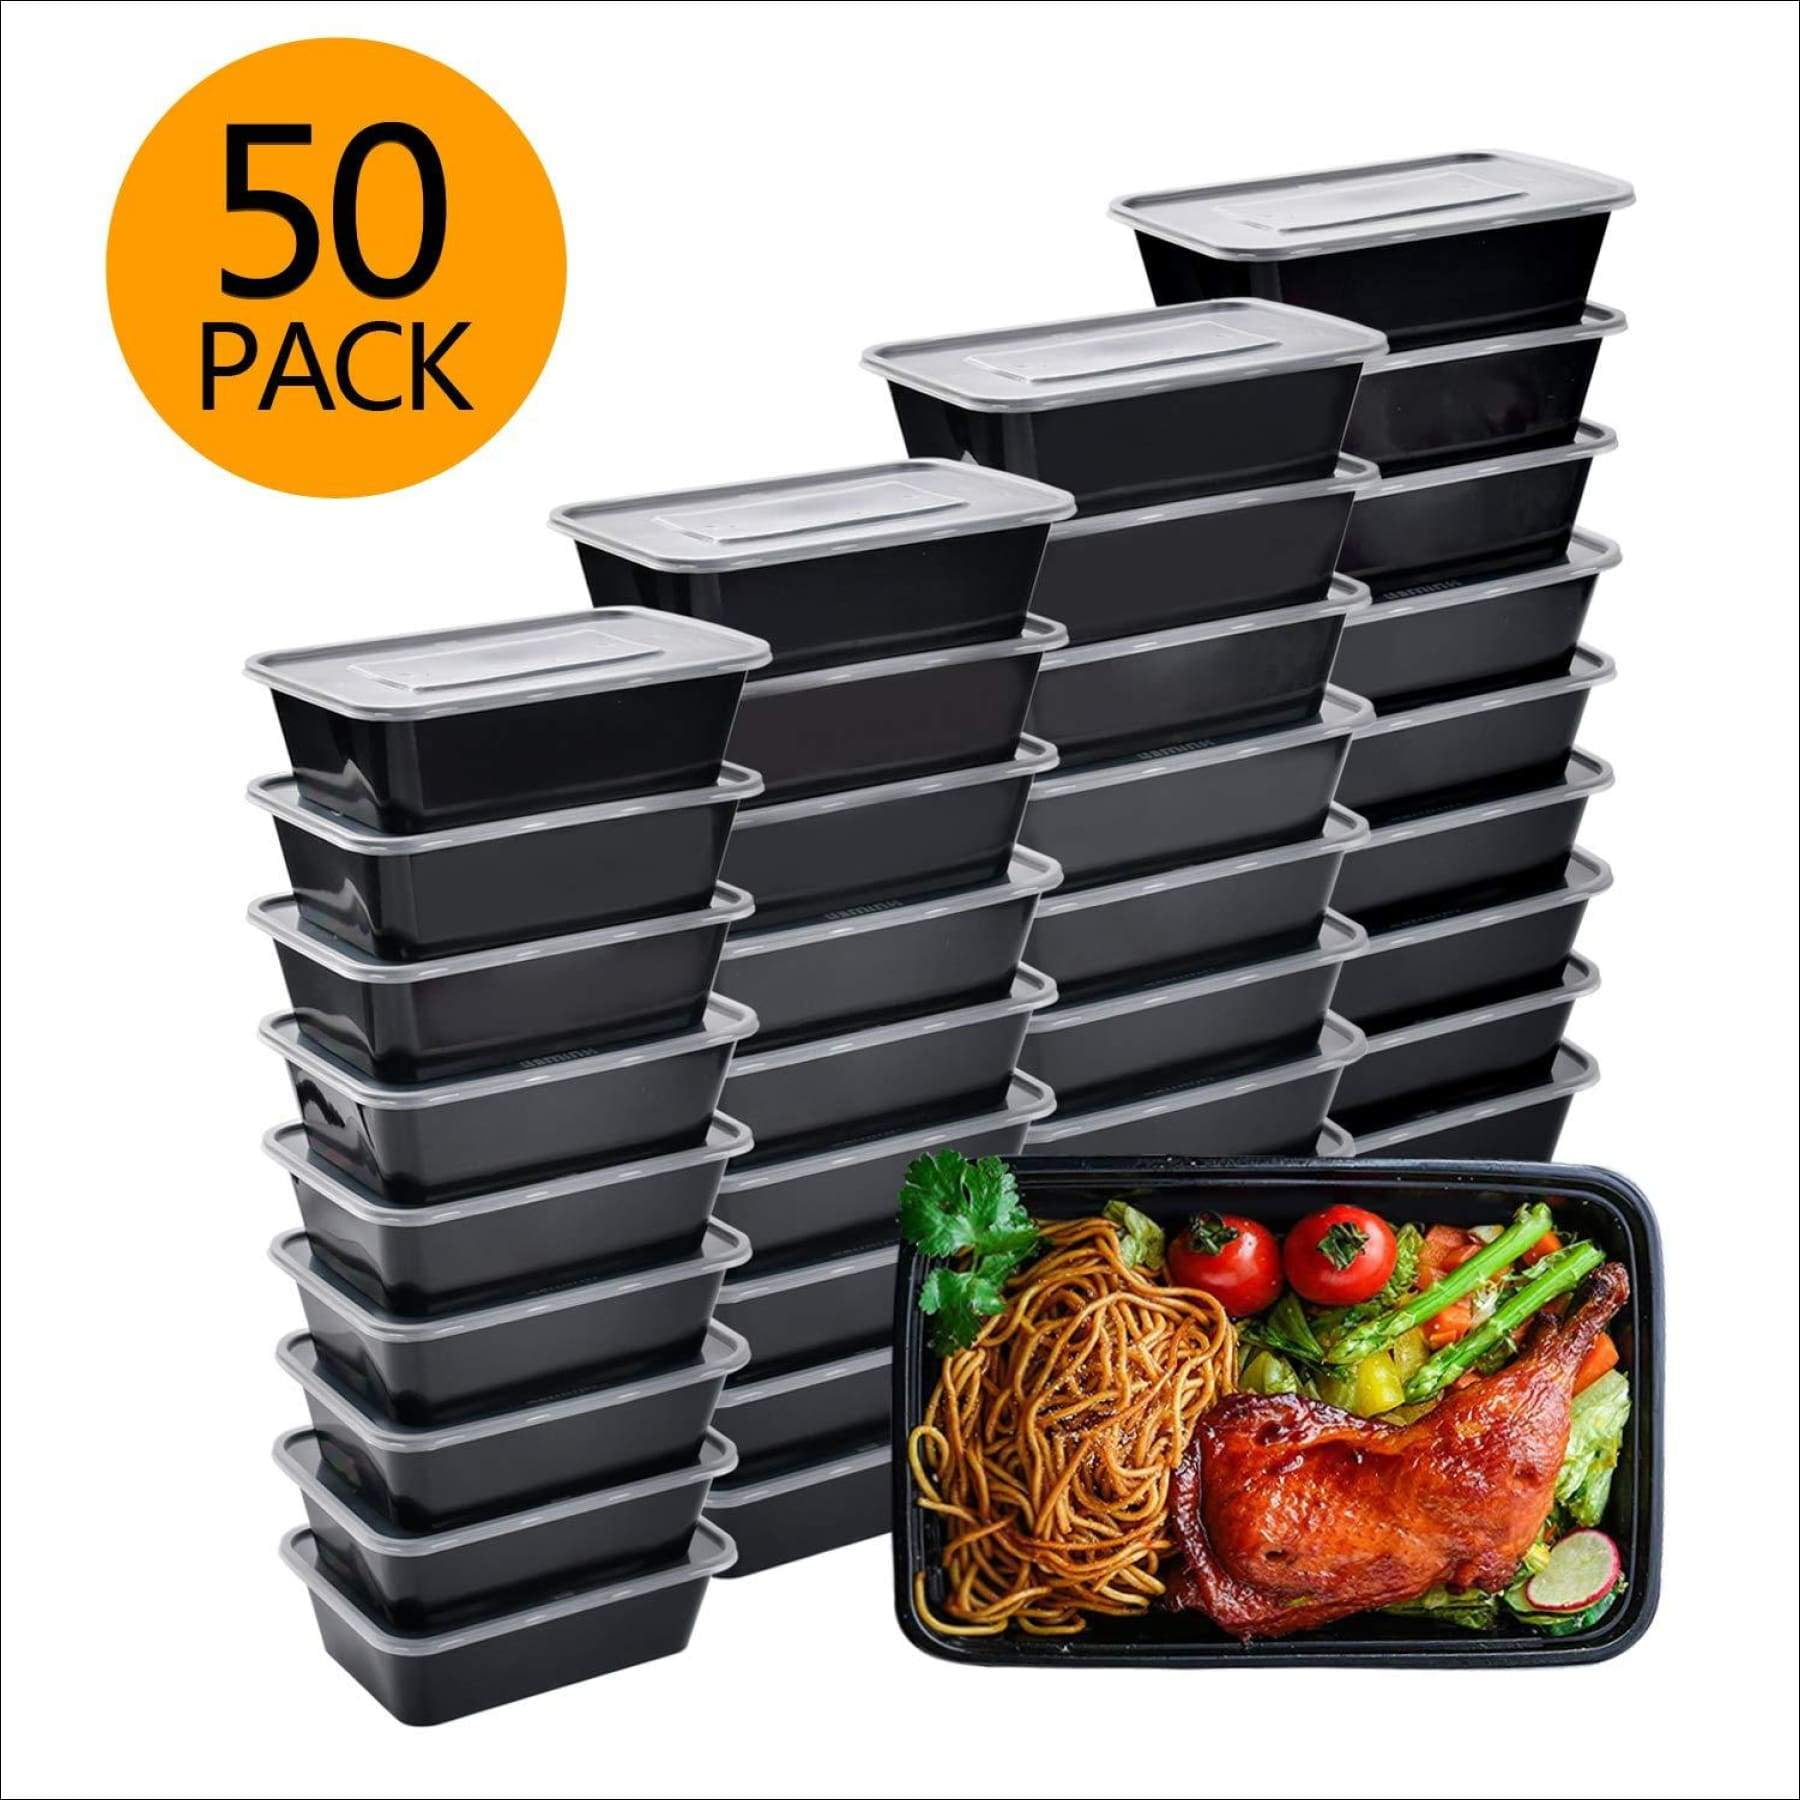 meal prep containers amazon uk